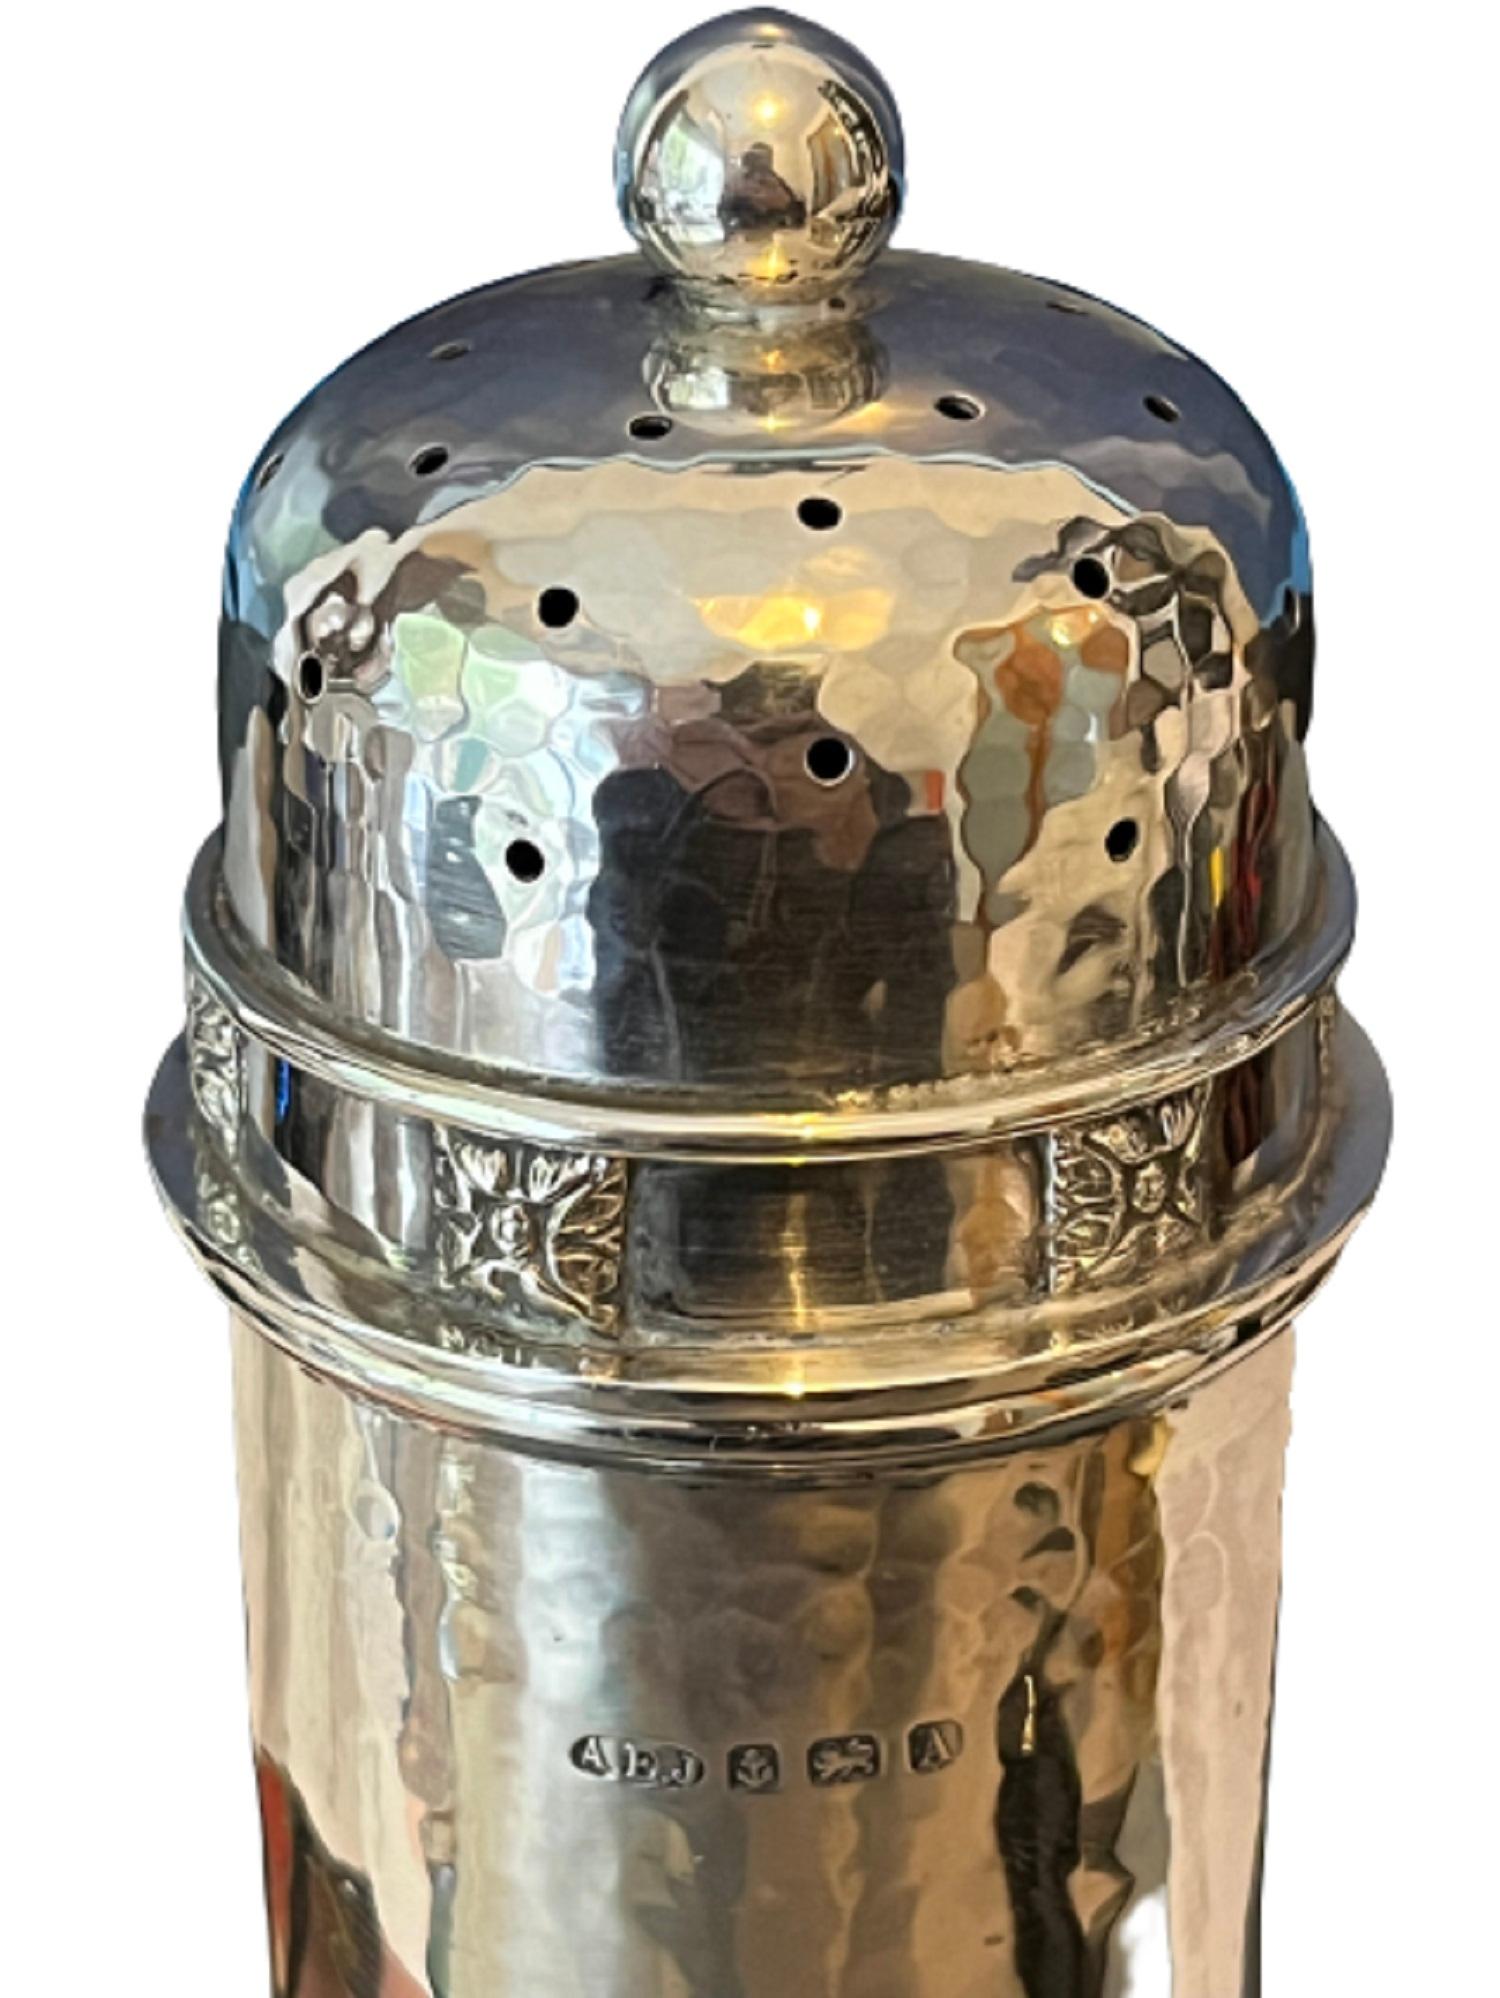 AN ARTS & CRAFTS SILVER SUGAR CASTER, of large size, the body with all-over hand hammered finish, twisted wirework decoration to the base, the detachable pierced cover with a frieze of silver lozenges depicting stylised flowers or leaves.

A.E.